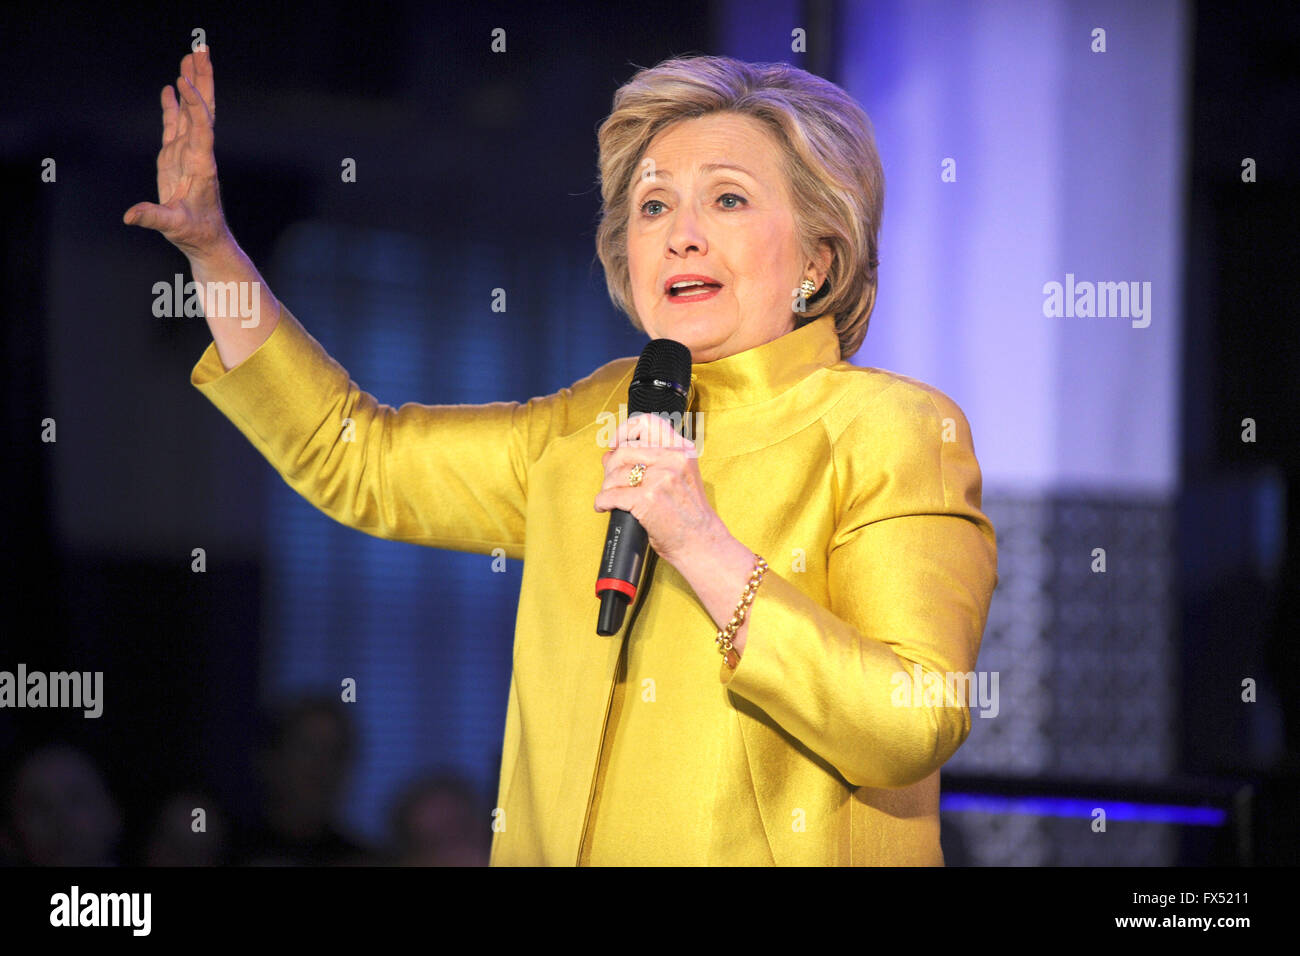 Former United States Secretary of State Hillary Rodham Clinton, a candidate for the Democratic Party nomination for President of the United States, speaks at the Café & Community in Brooklyn, New York on Sunday April 10, 2016. Stock Photo